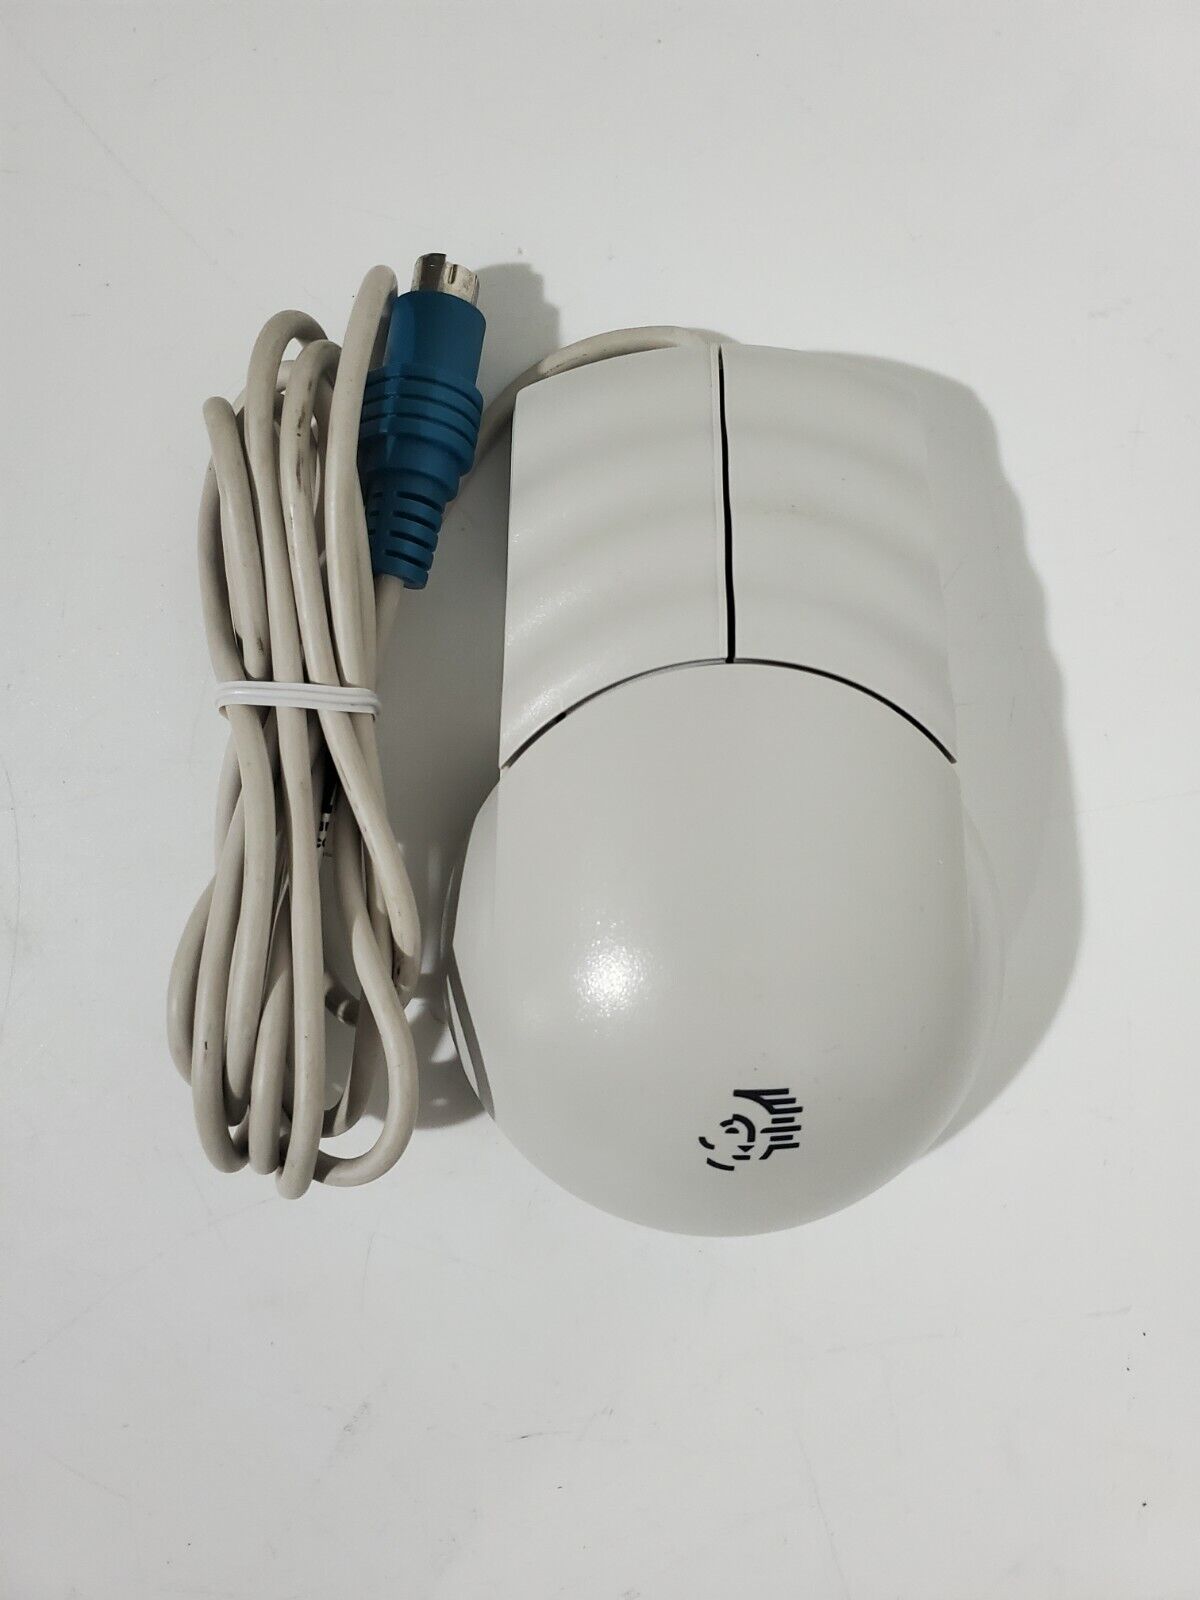 Vintage PACKARD BELL Wired PS/2 Mechanical Mouse 2-Button White MUSBJ